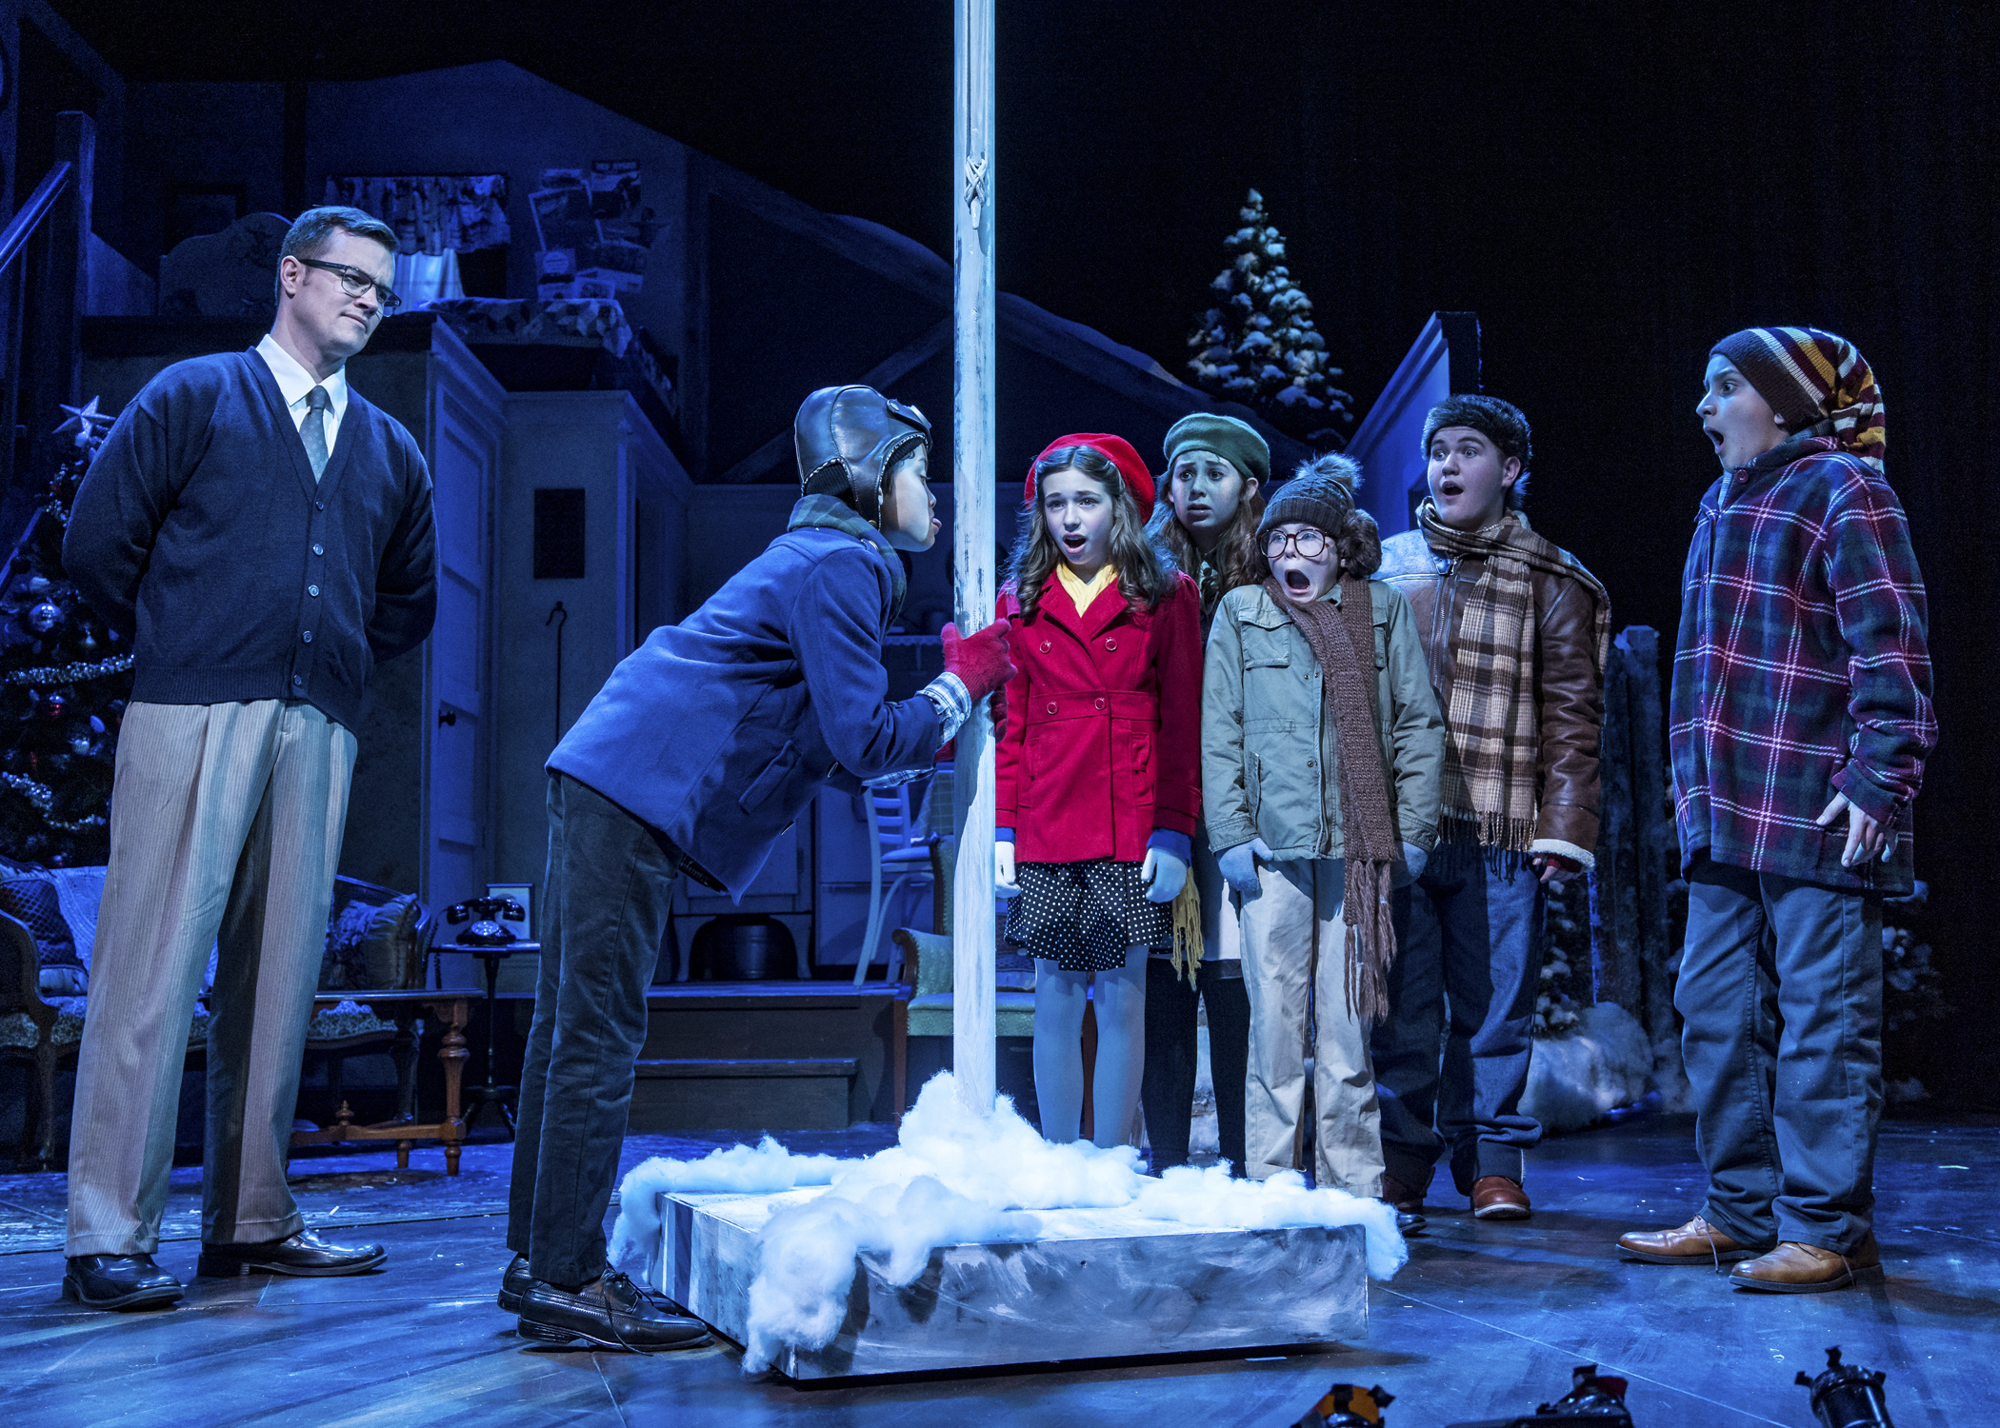 The Garden Theatre’s production of “A Christmas Story” brings many of the film’s iconic scenes to the stage.